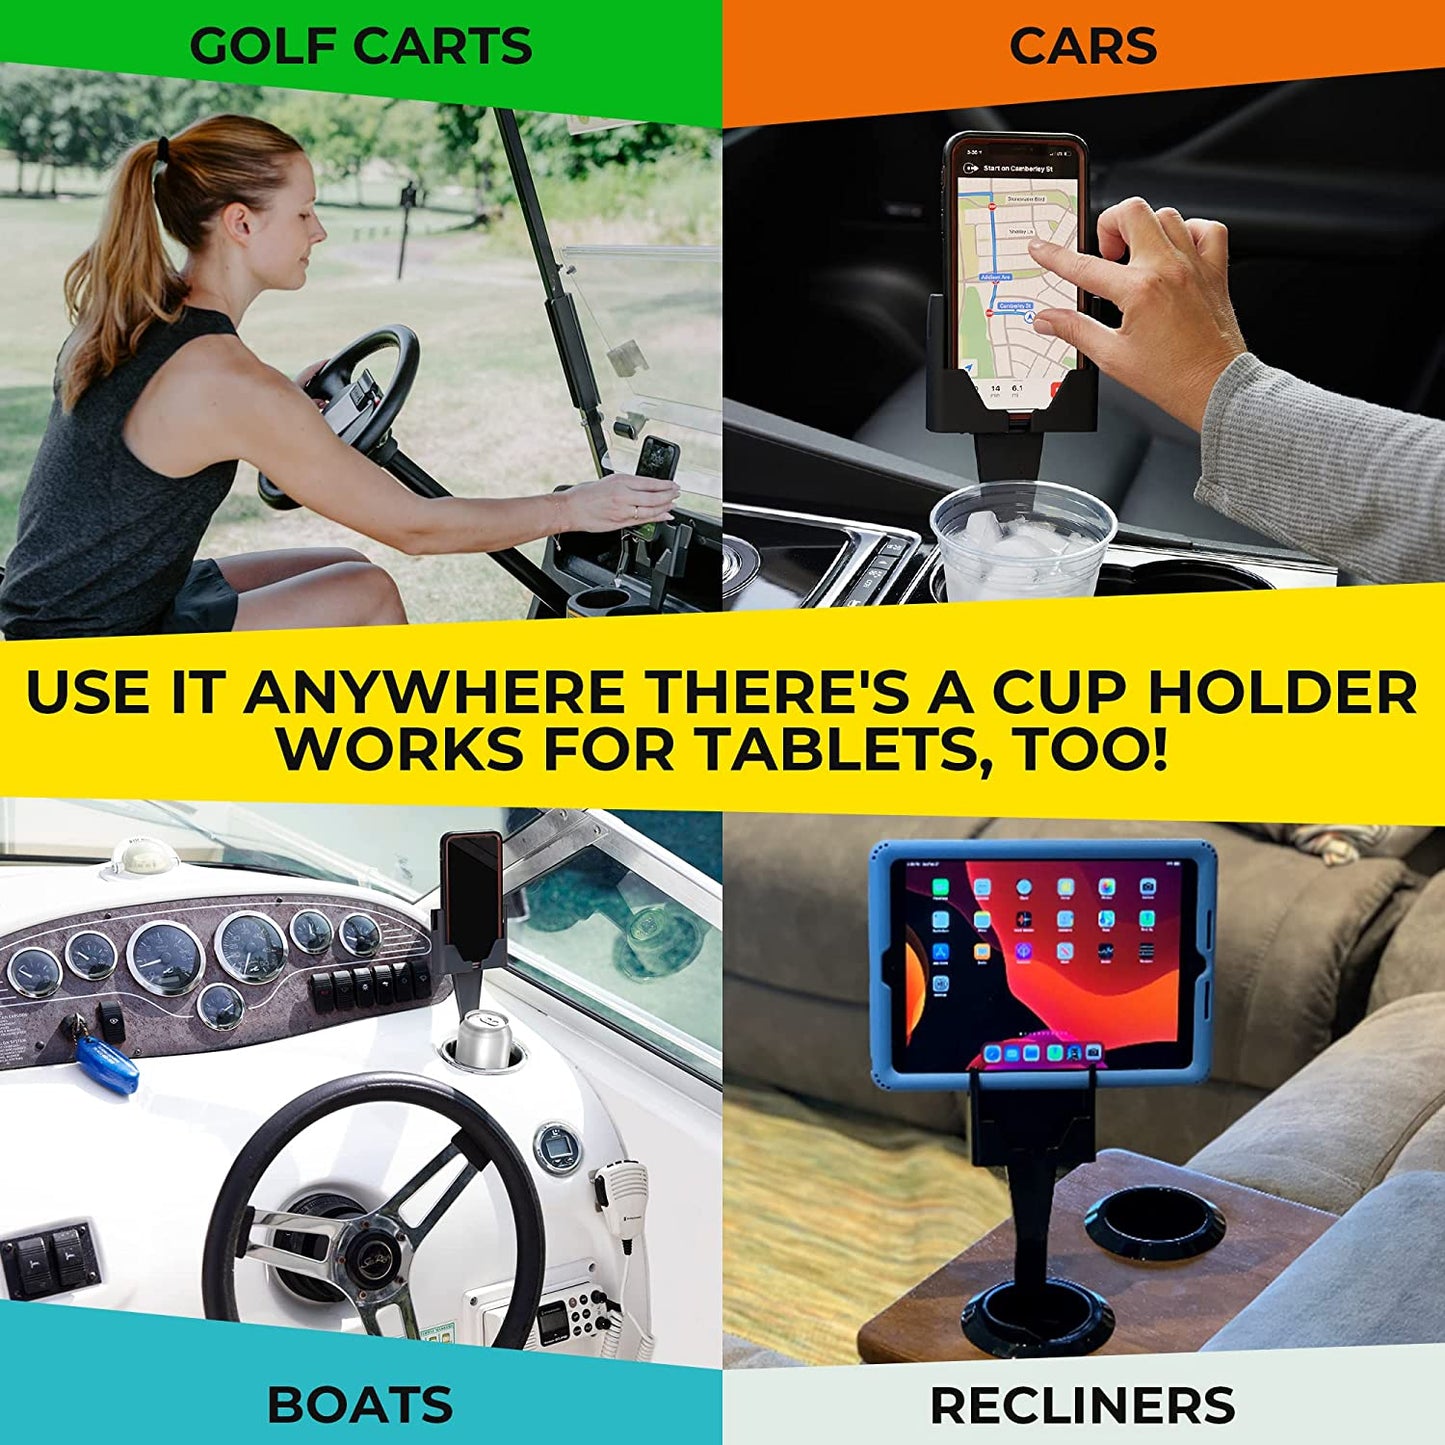 CELL PHONE SEAT,  Phone & Cup Holder Made in USA – Fits Phones with or Without Cases in Vertical or Horizontal Position and Doesn’t Block Cup Holder, Charging Ports, Vents, Windshield